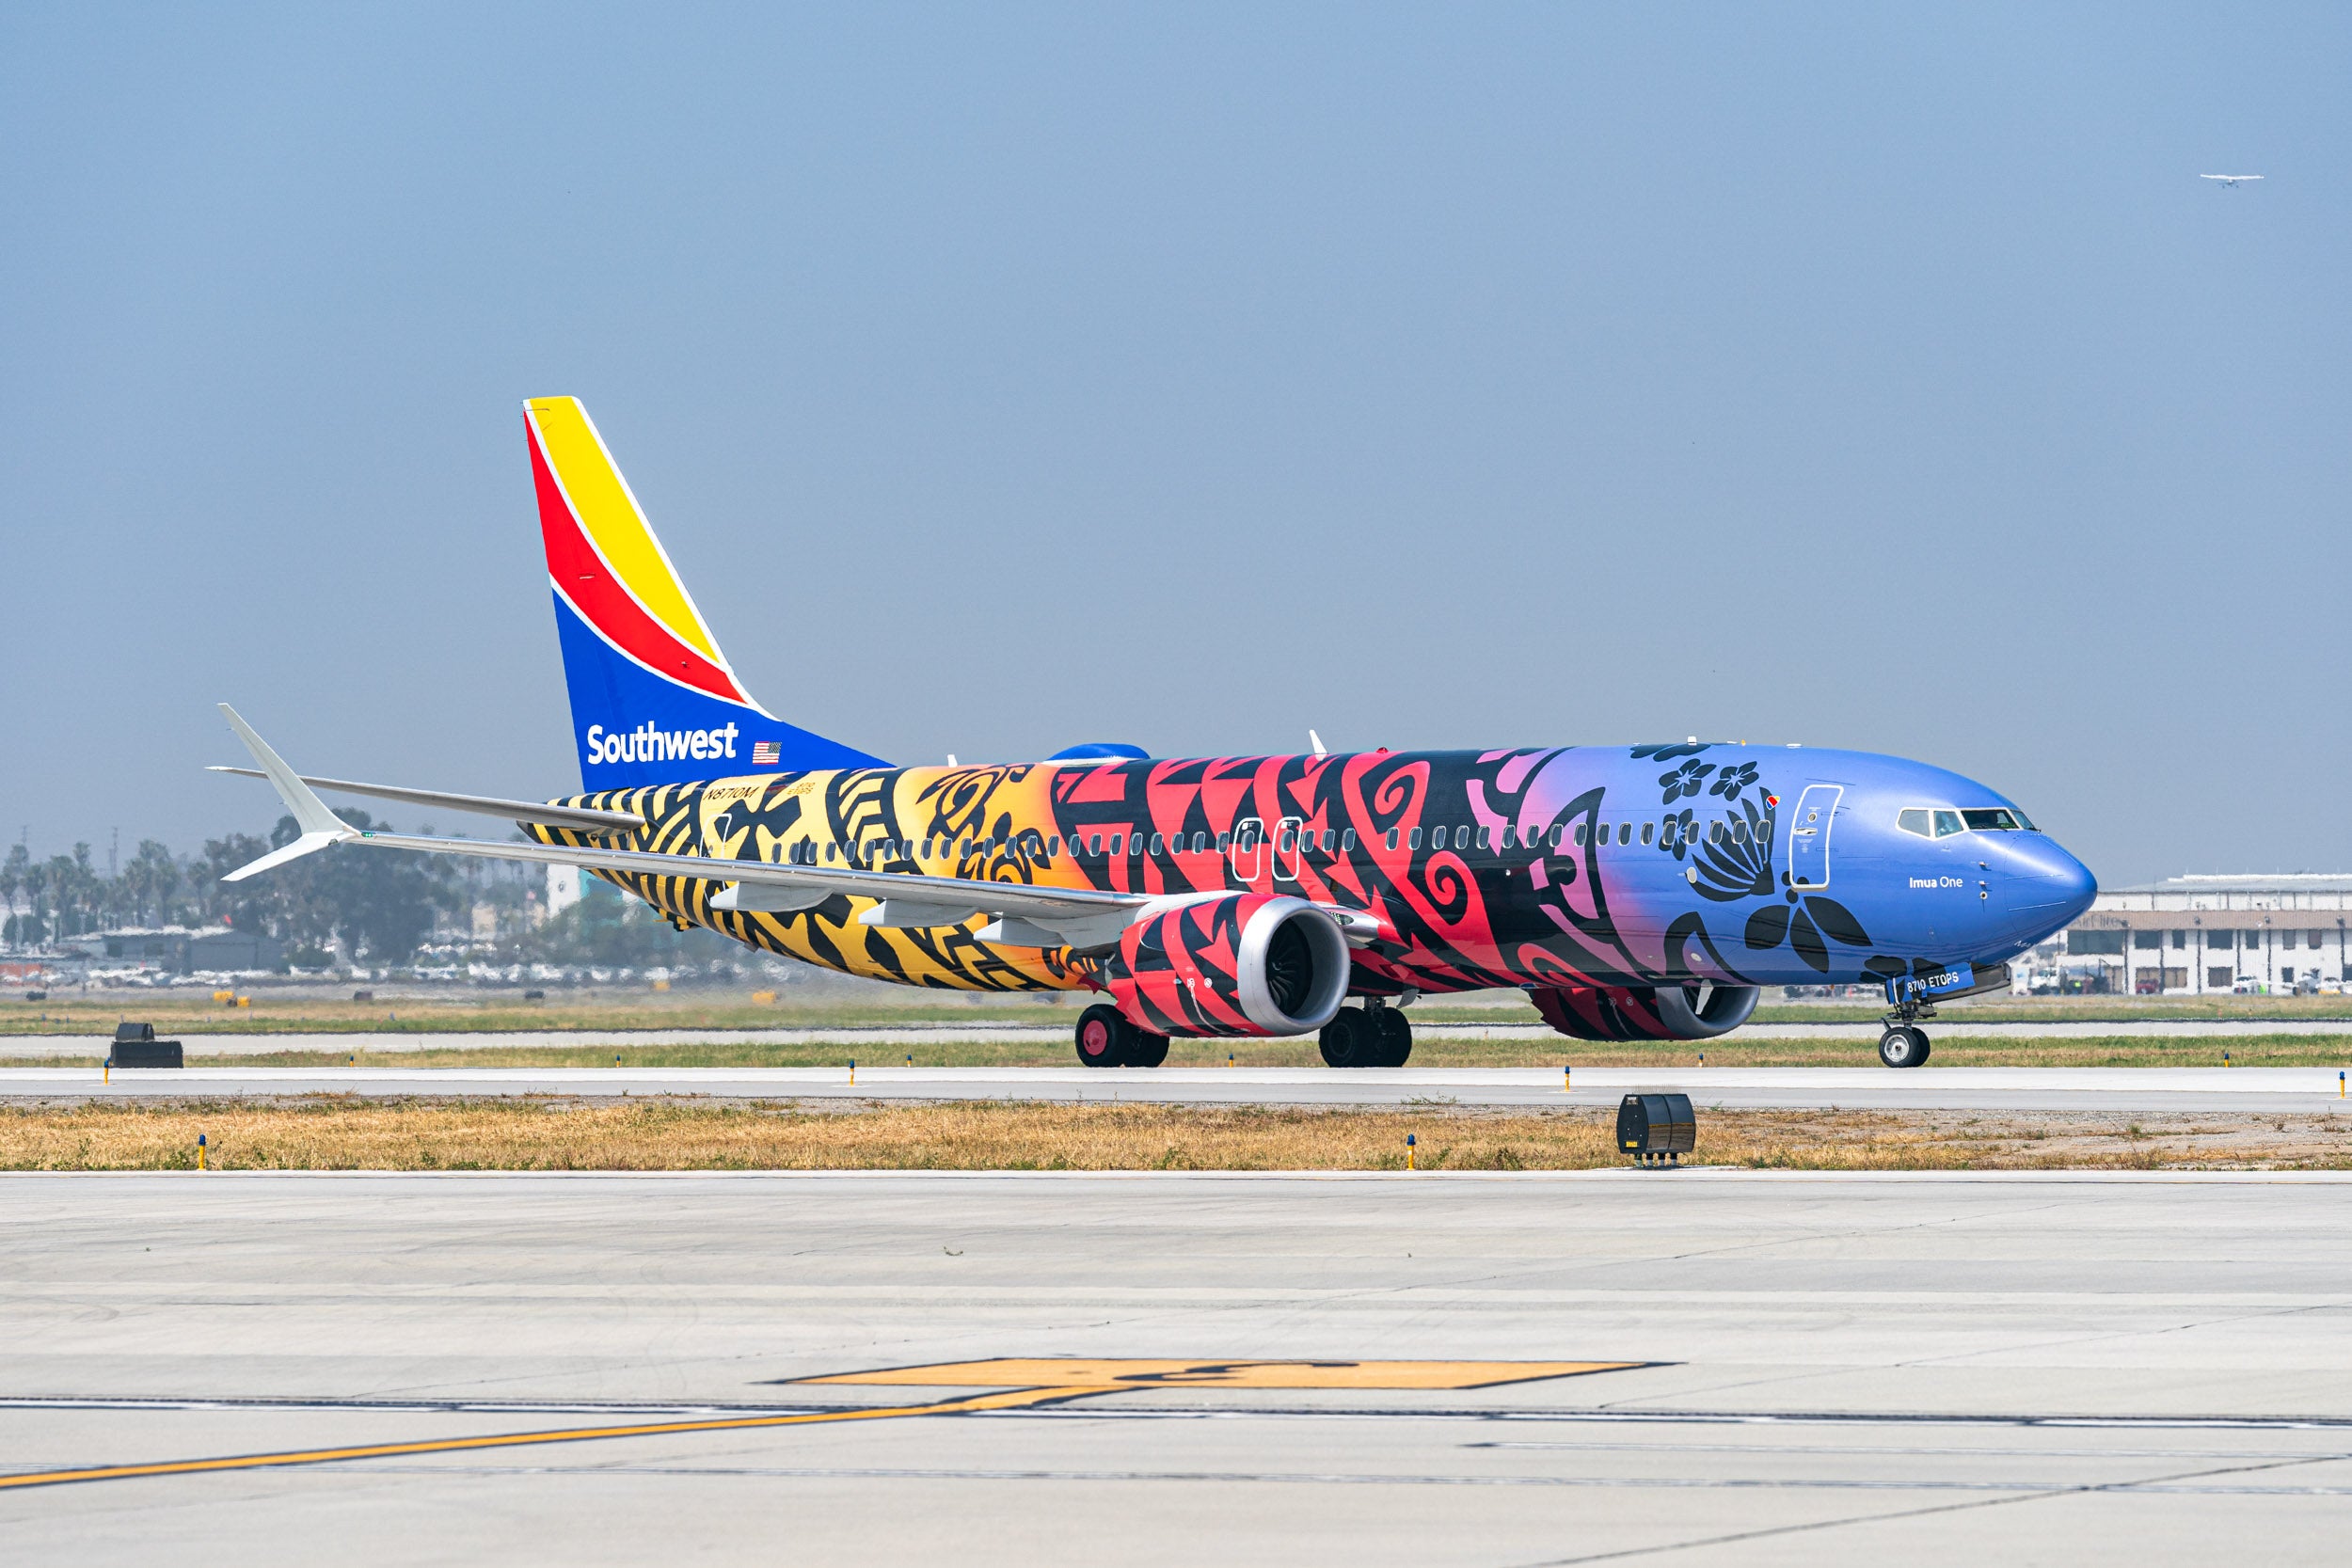 Southwest unveils stunning new Hawaii-themed aircraft - The Points Guy